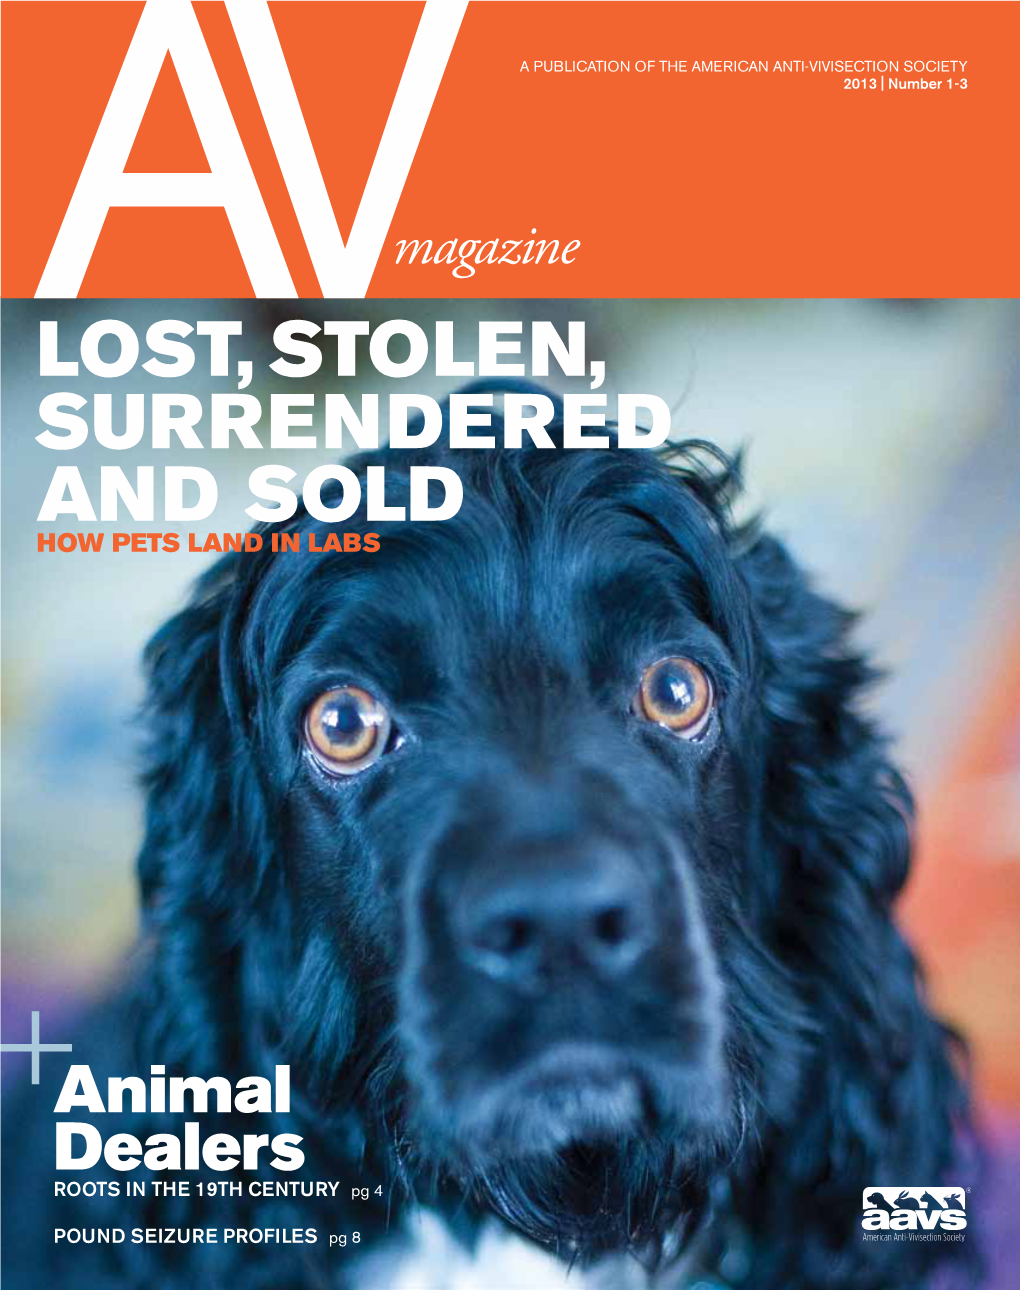 Lost, Stolen, Surrendered and Sold How Pets Land in Labs